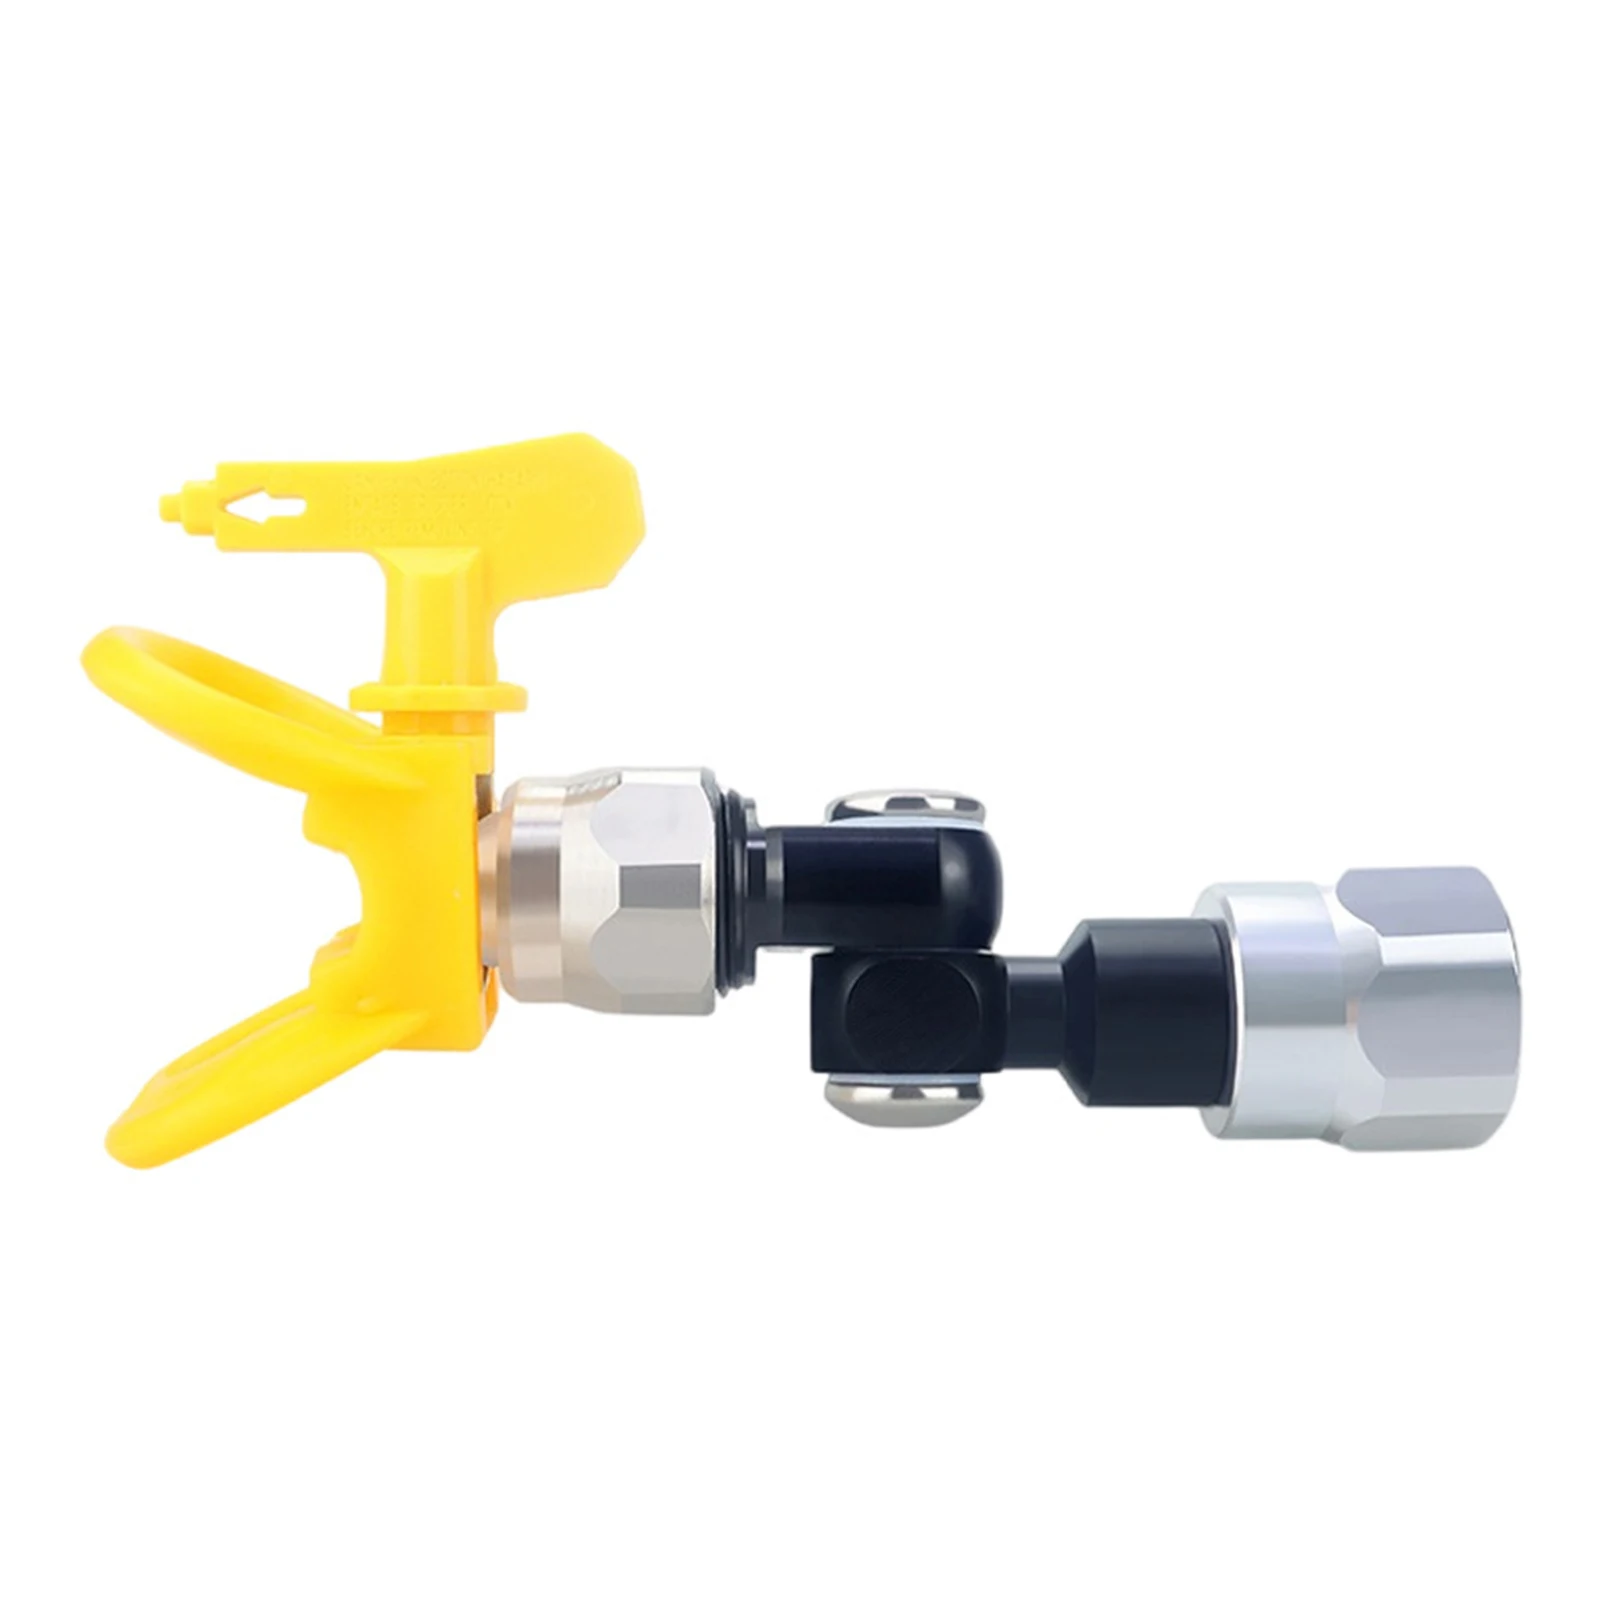 

Airless Sprayer Universal Joint Nozzle Holder With Sealing Gasket Multifunctional Efficient Alloy Latex Paint Connector Flexible